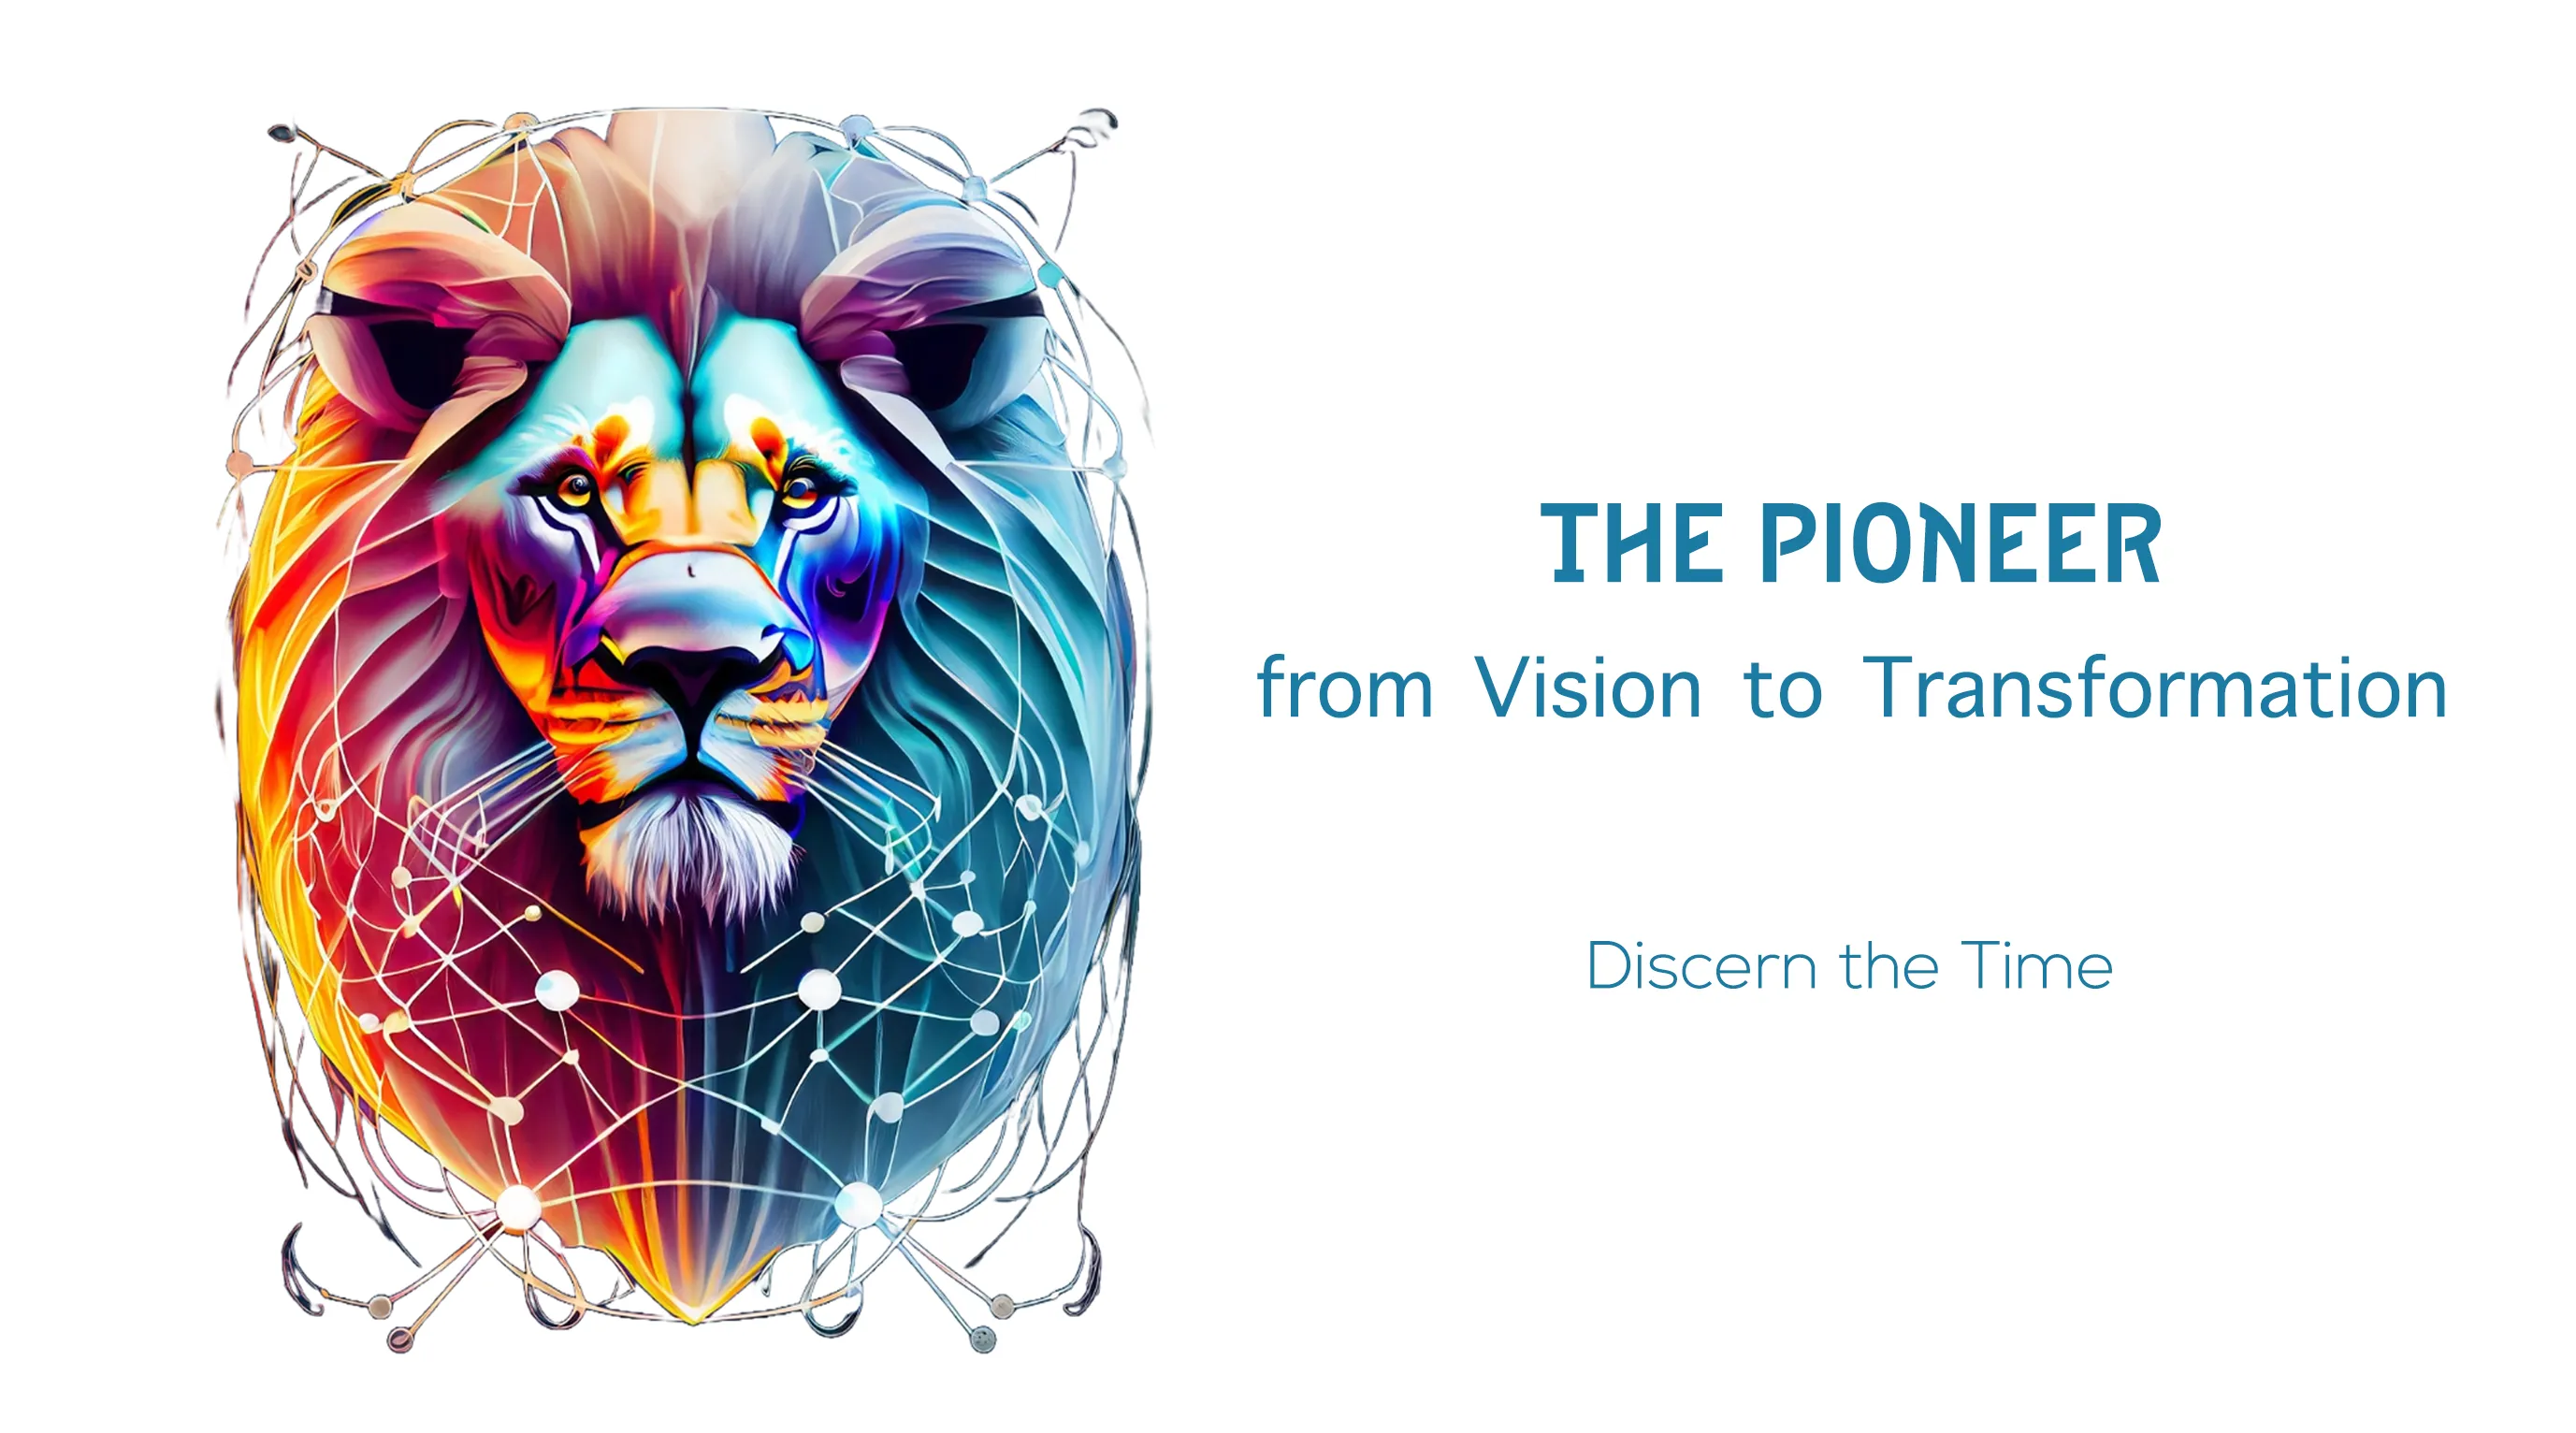 The Pioneer: from Vision to Transformation